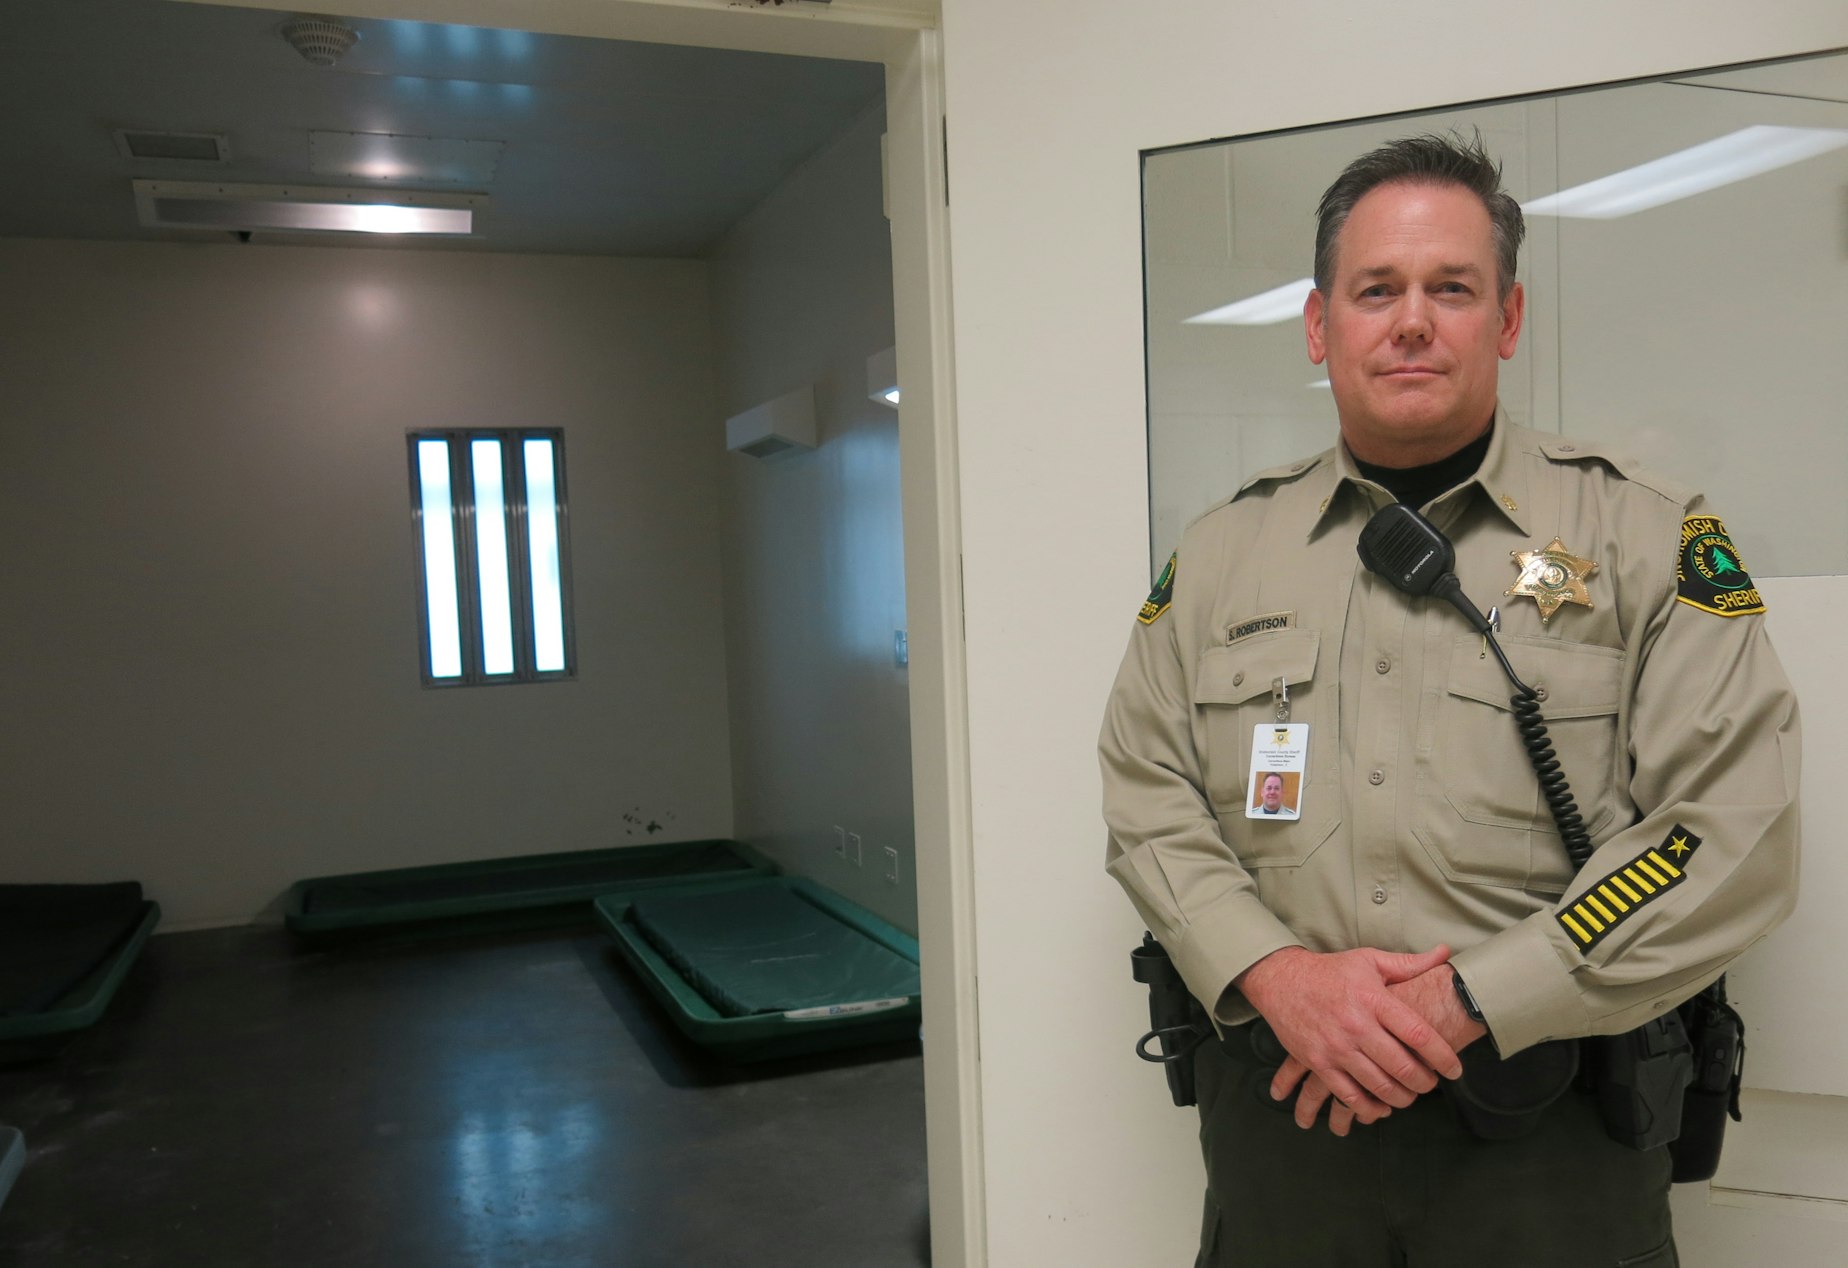 KUOW Give treatment to any inmate who wants it. That's Snohomish